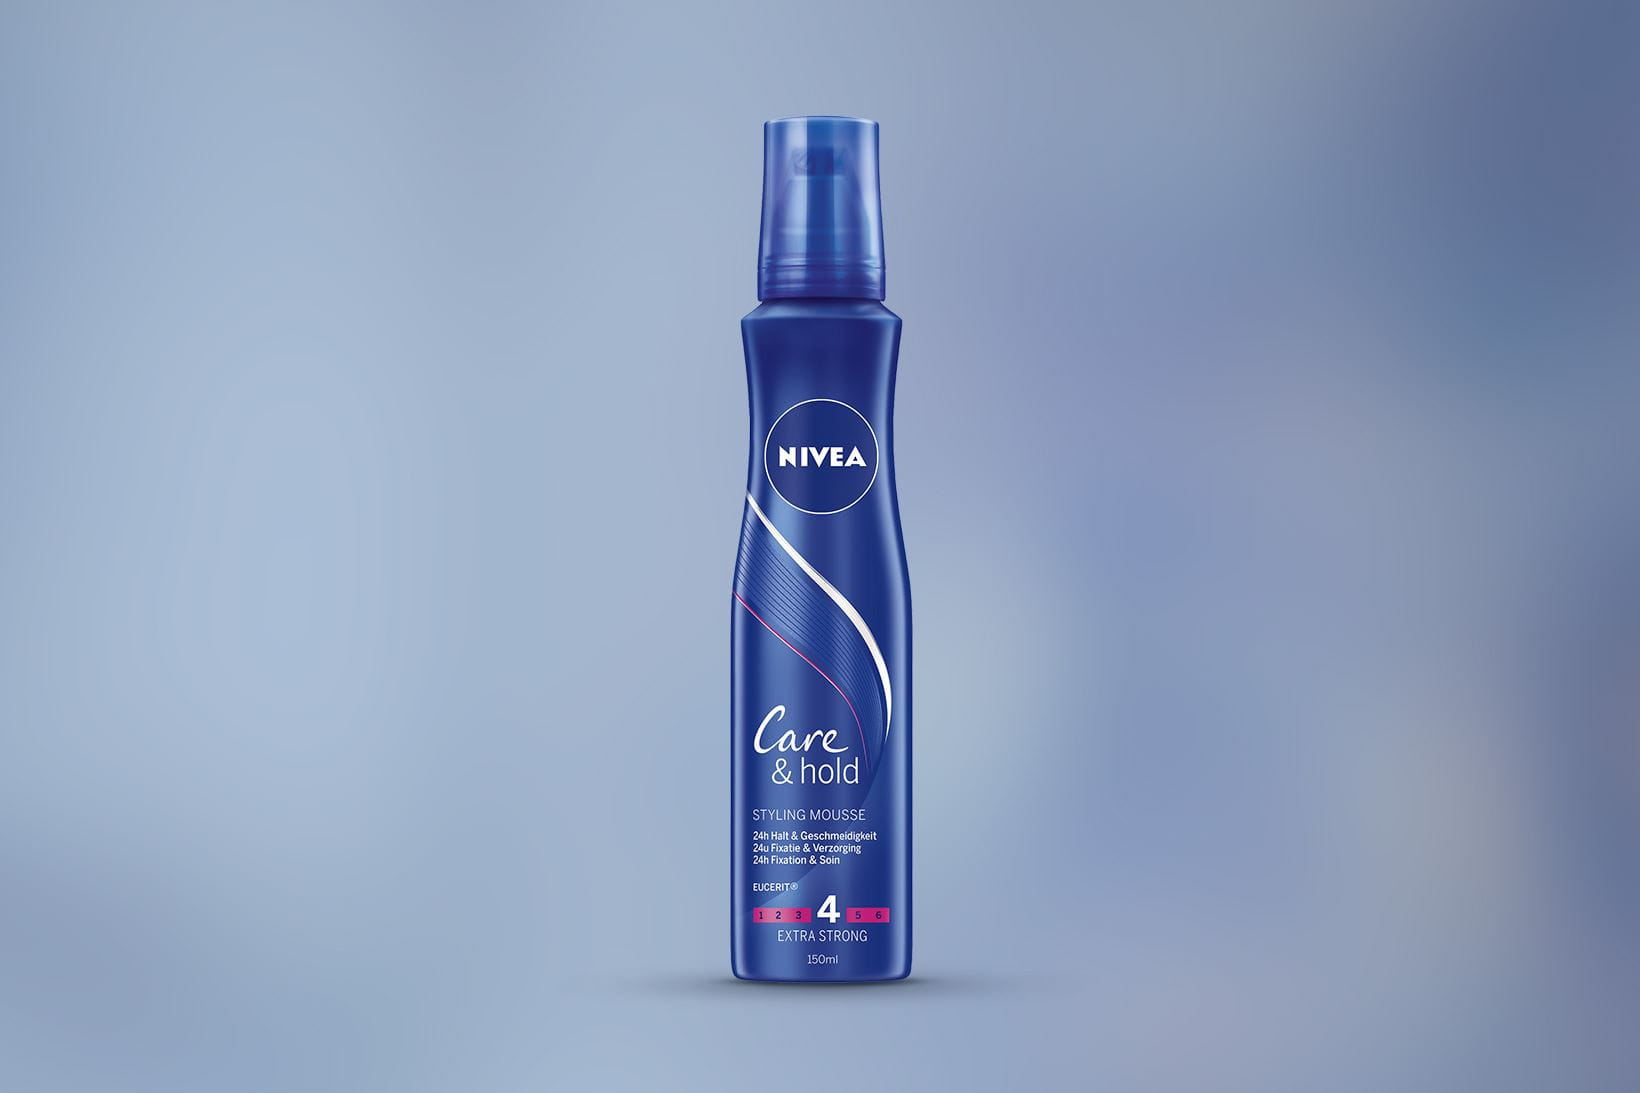 NIVEA Care & Hold Styling Mousse 